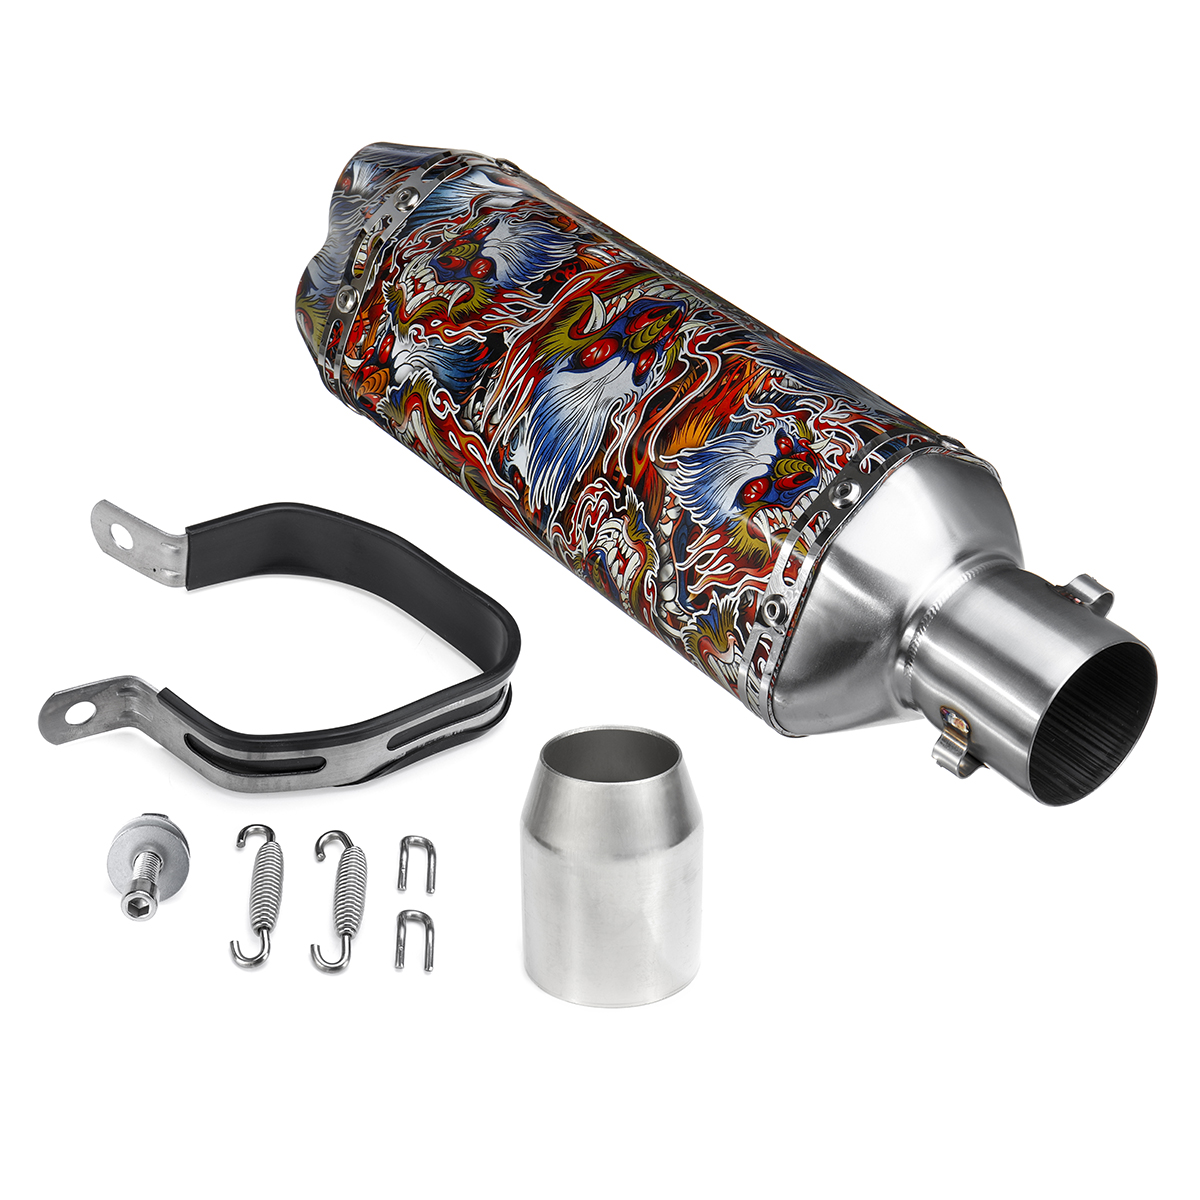 

38-51mm Motorcycle Exhaust Pipe Tail Muffler Stainless Dual Outlet with Silencer Universal